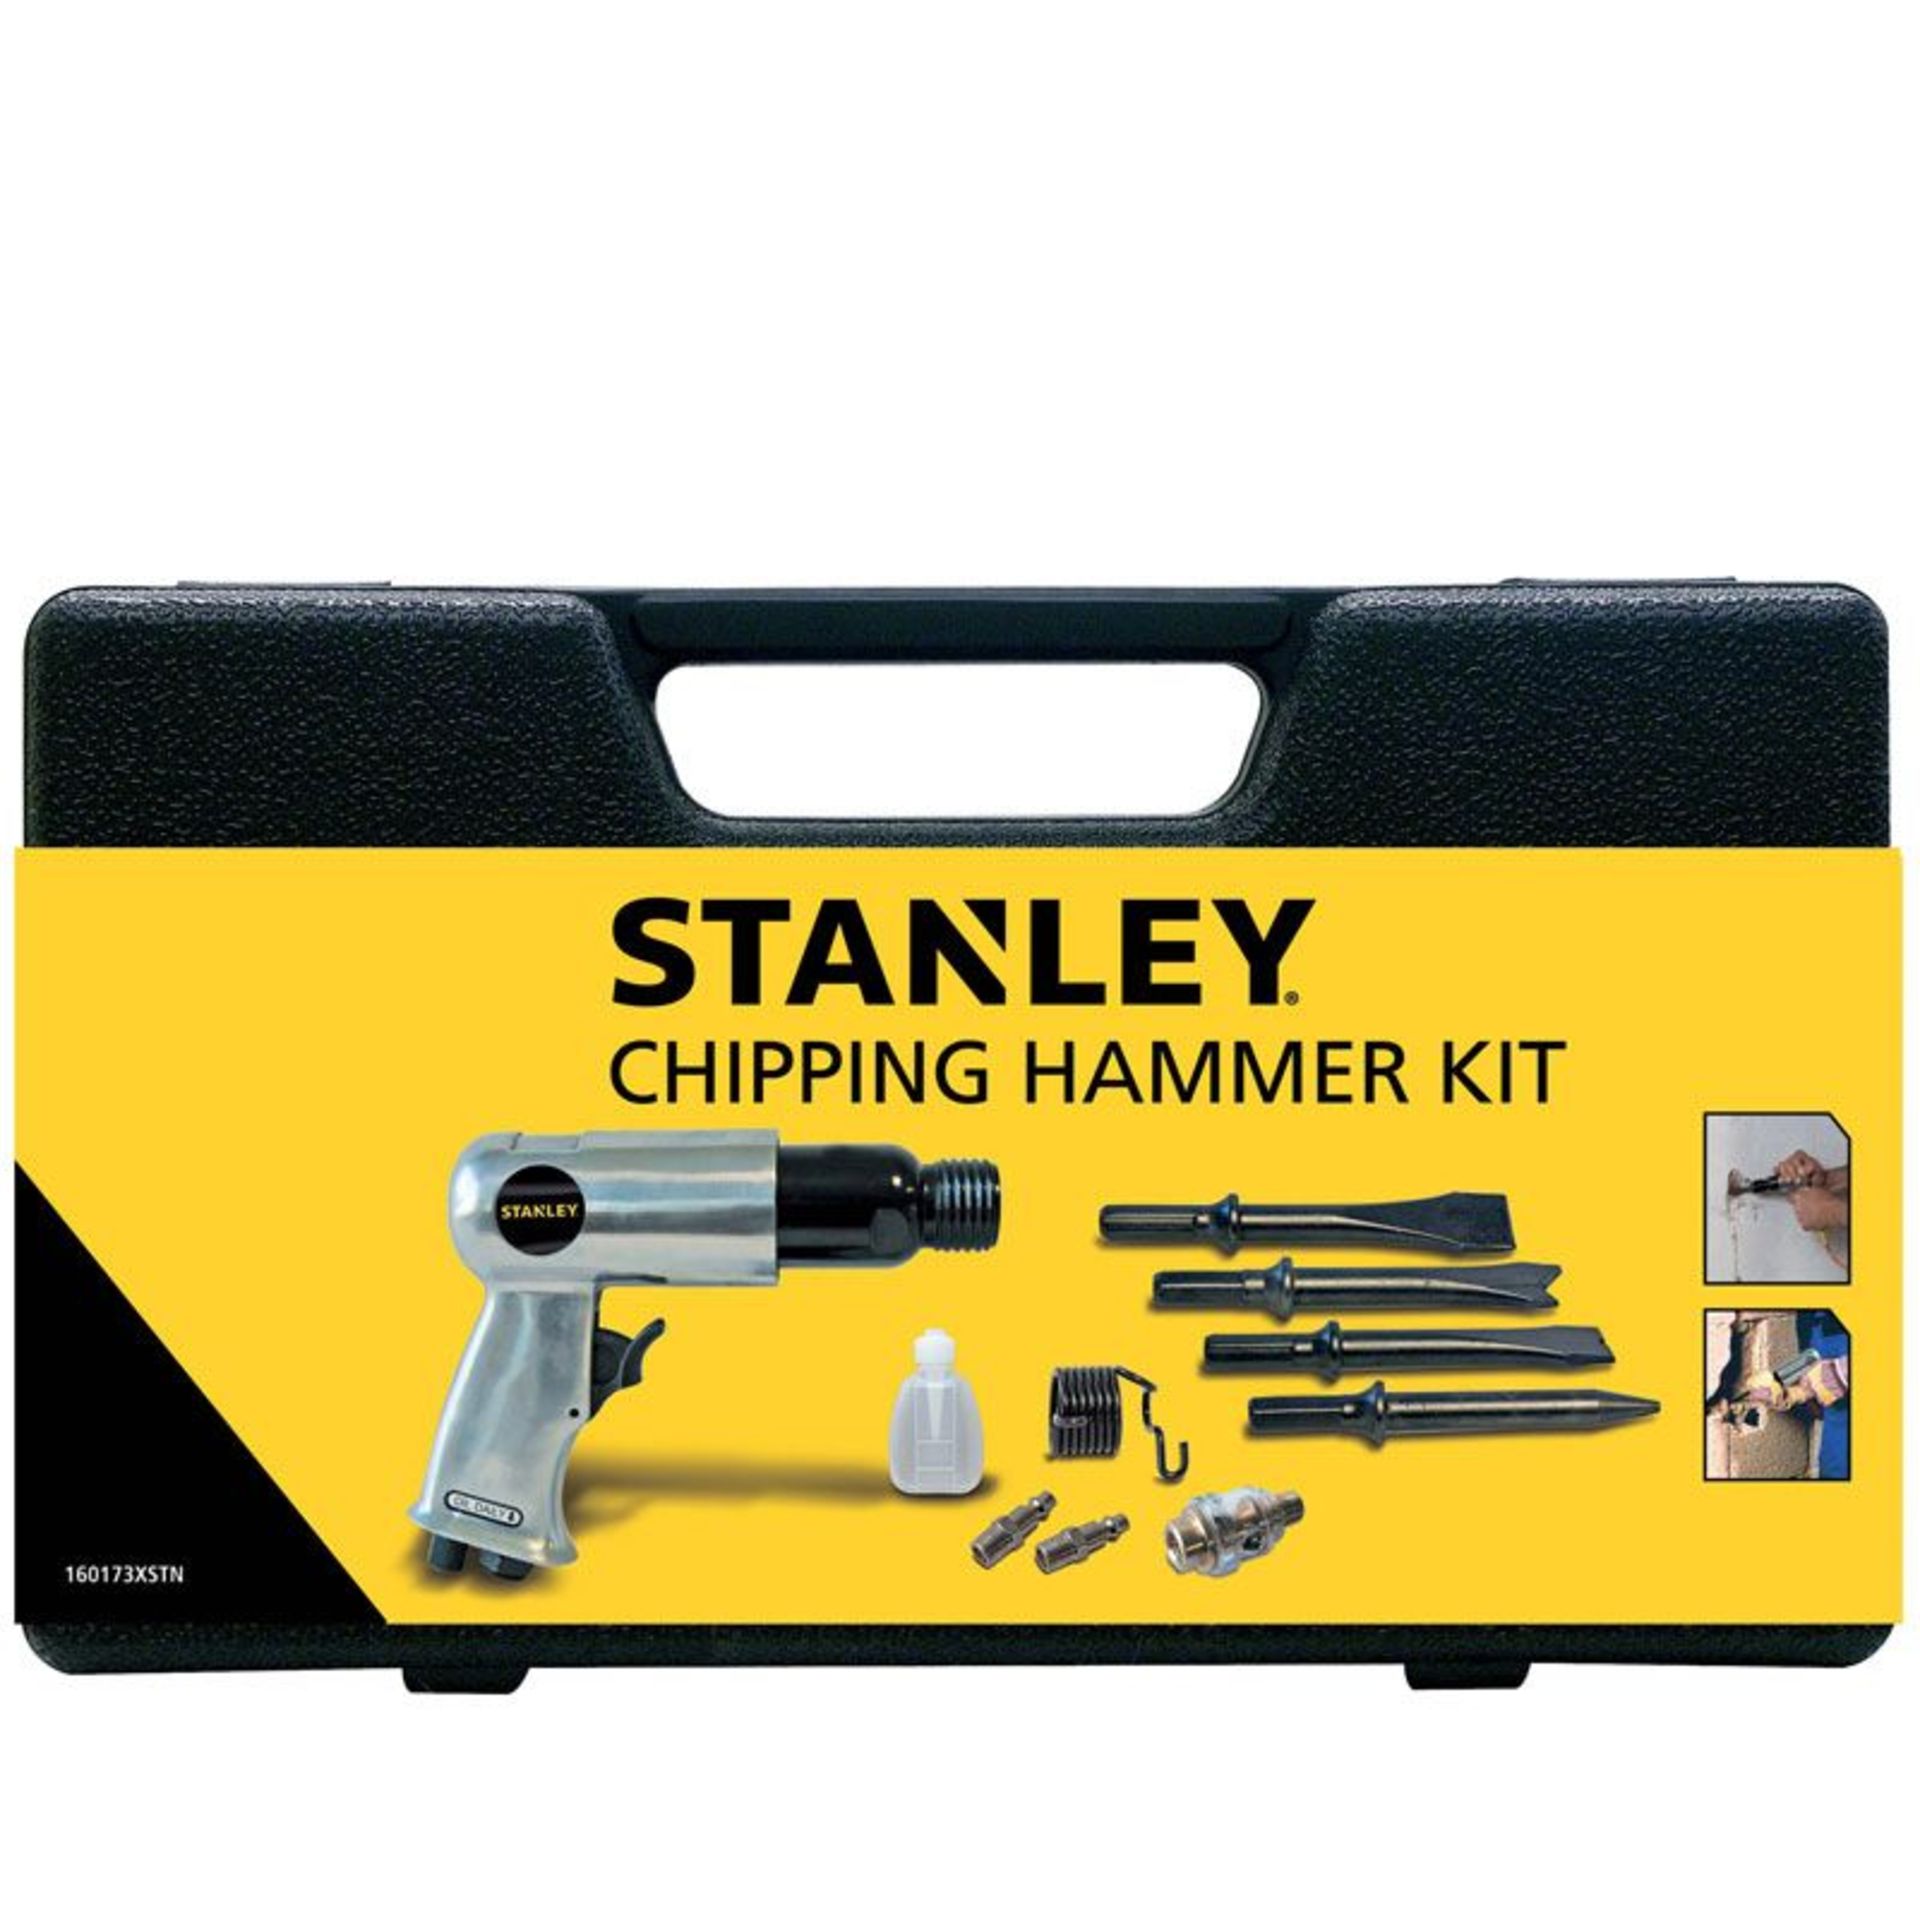 5 X Brand new Stanley Tools for Air Compressor Pneumatic Hammer Kit,